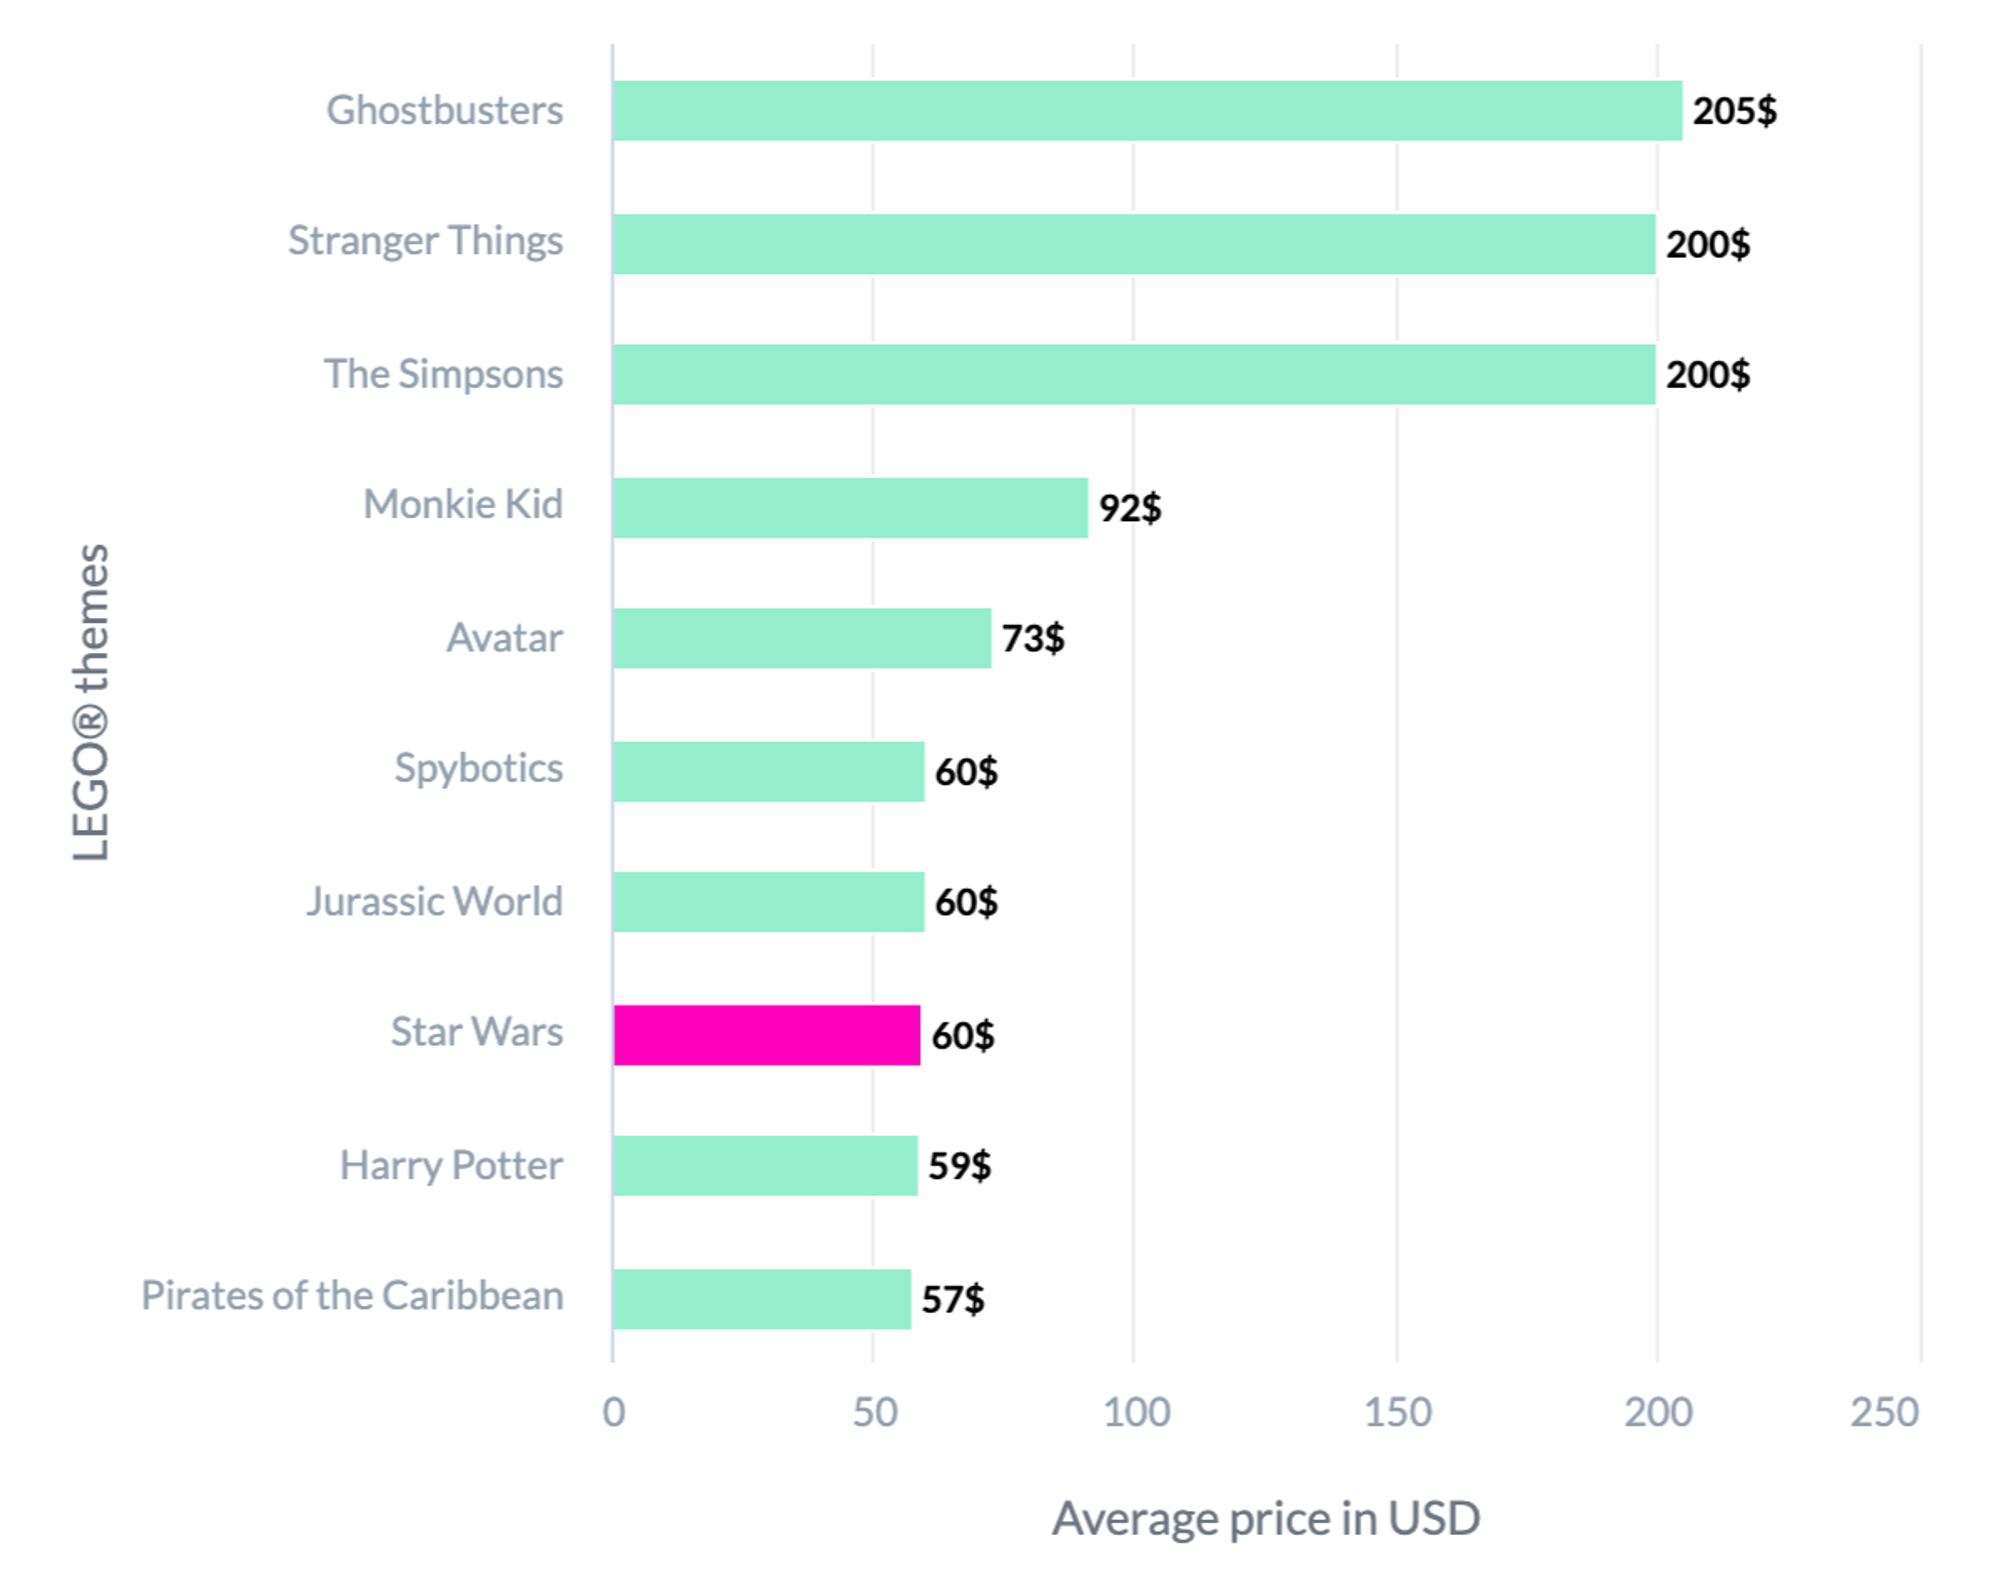 The top 10 most expensive LEGO® themes are measured by the average set price, with the Star Wars™ theme in the 8th place.